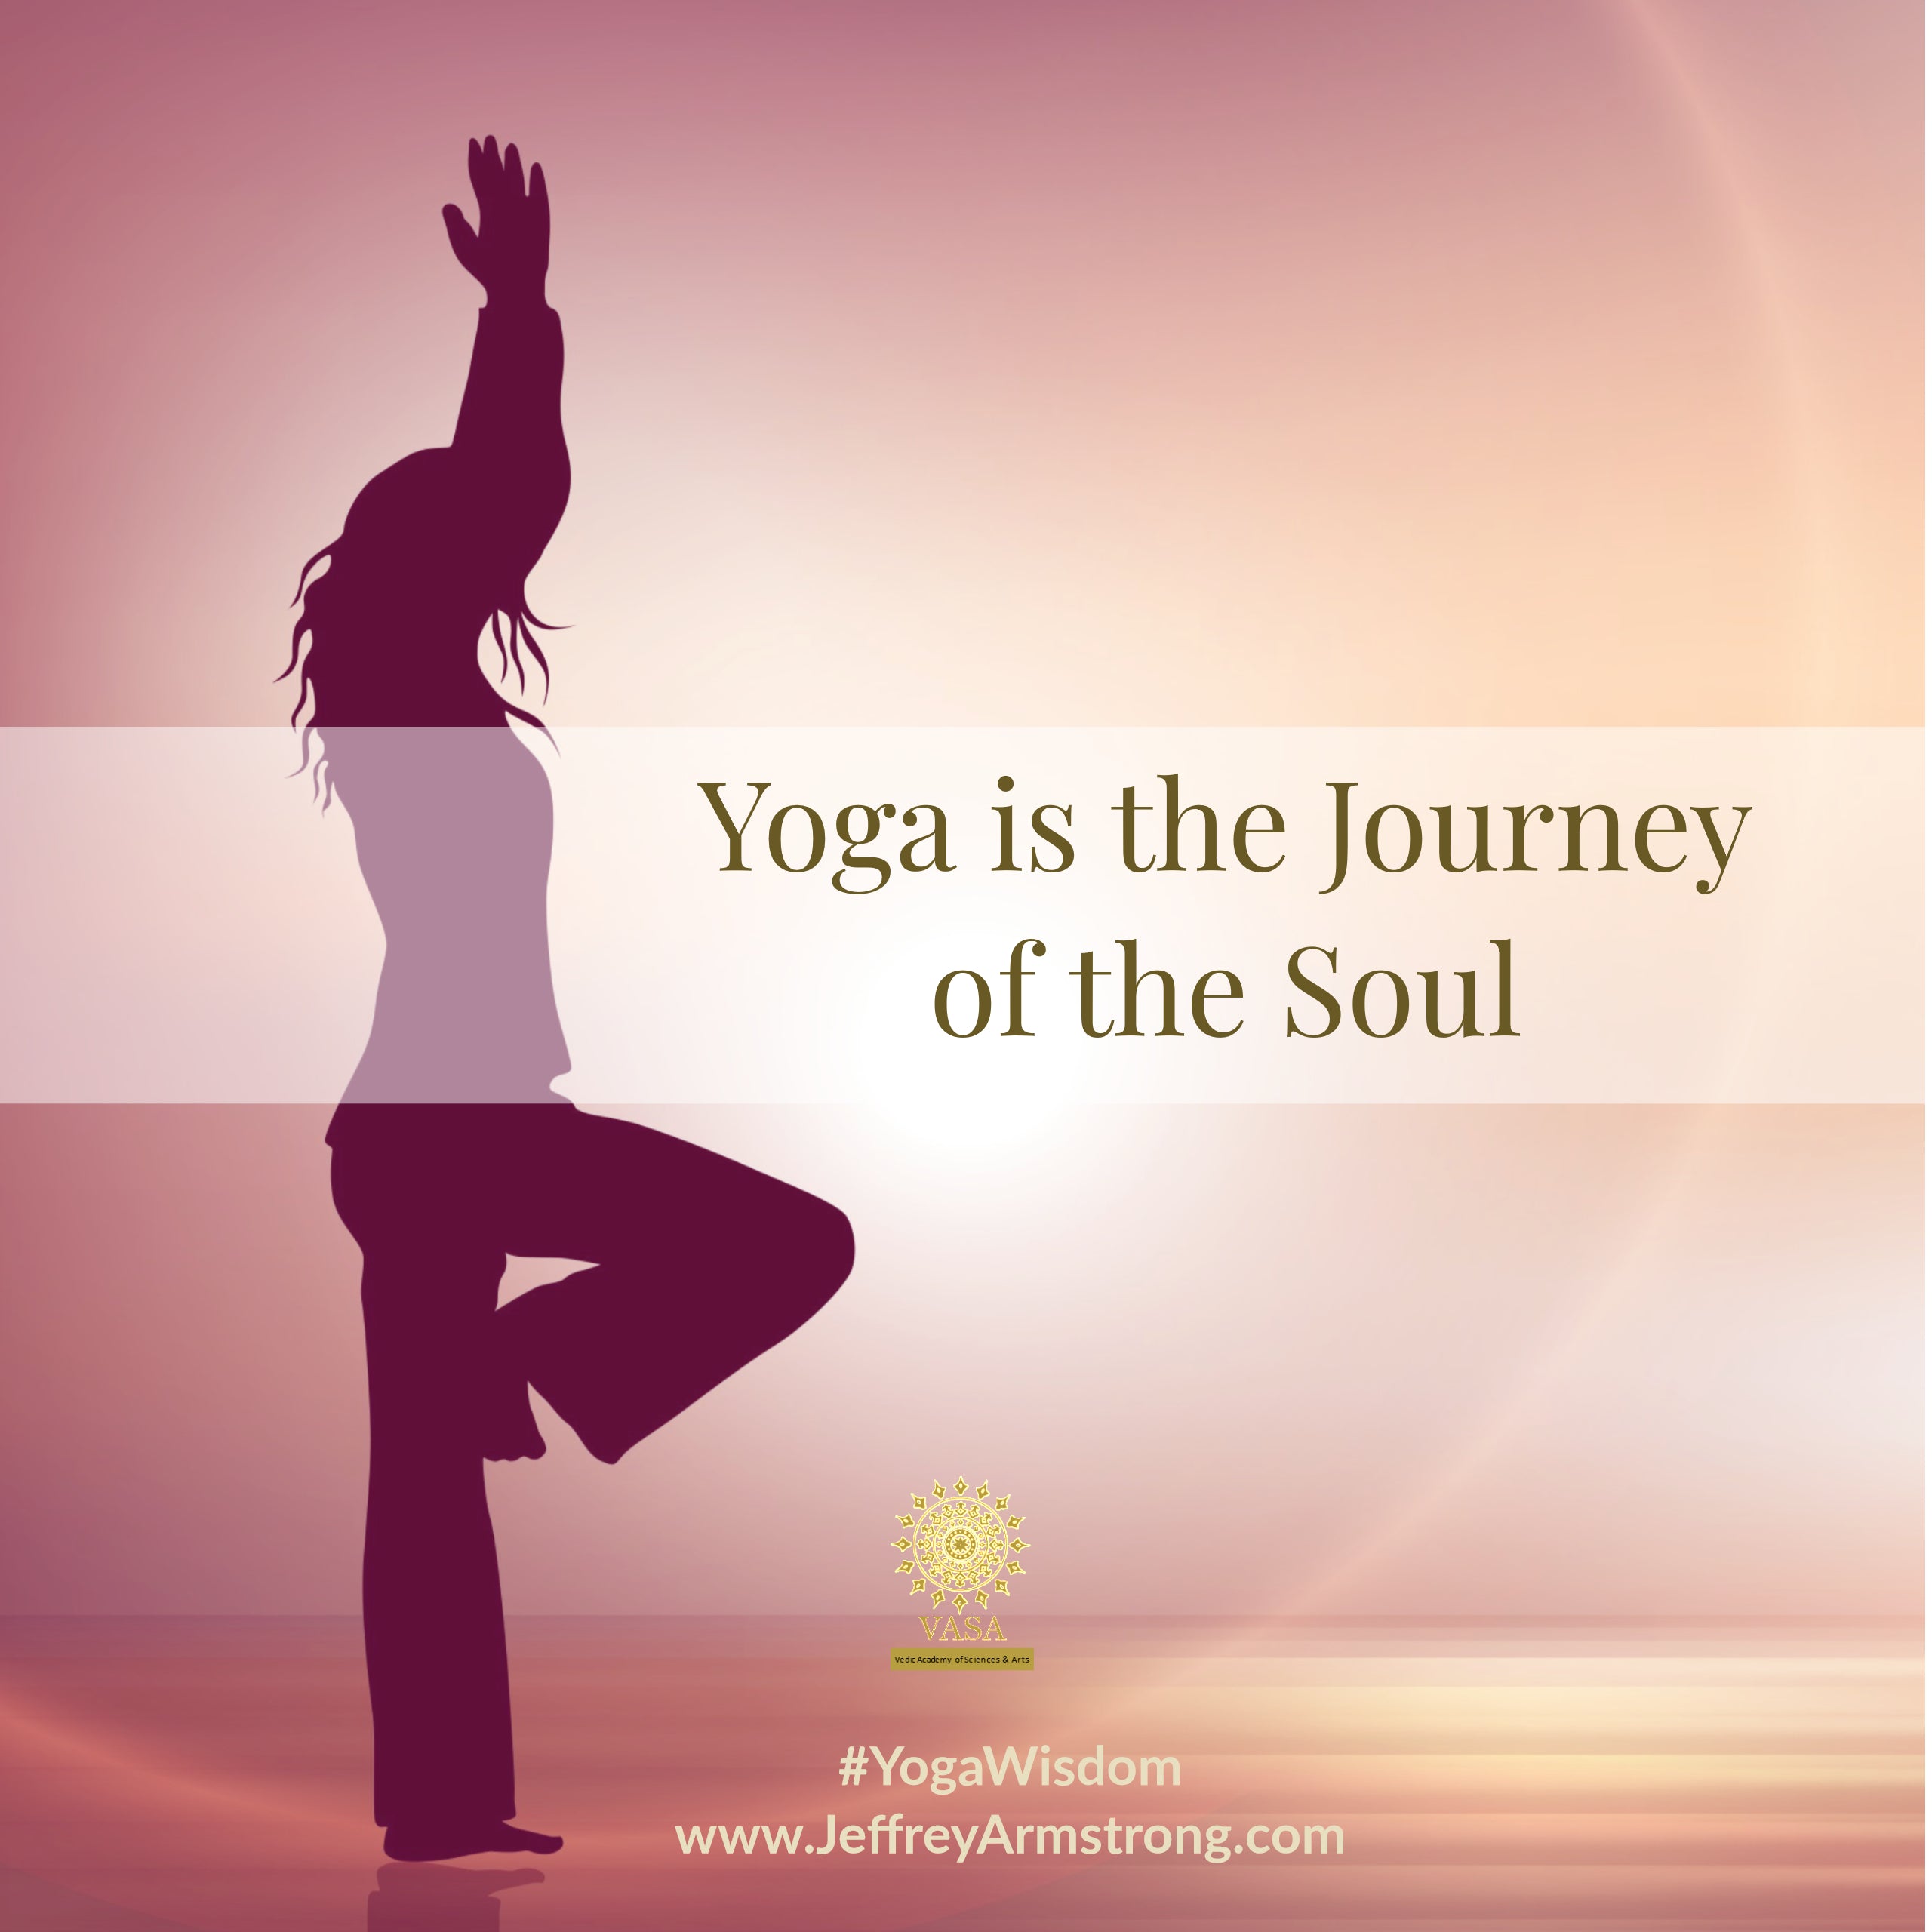 YOGA is the Journey of the Soul